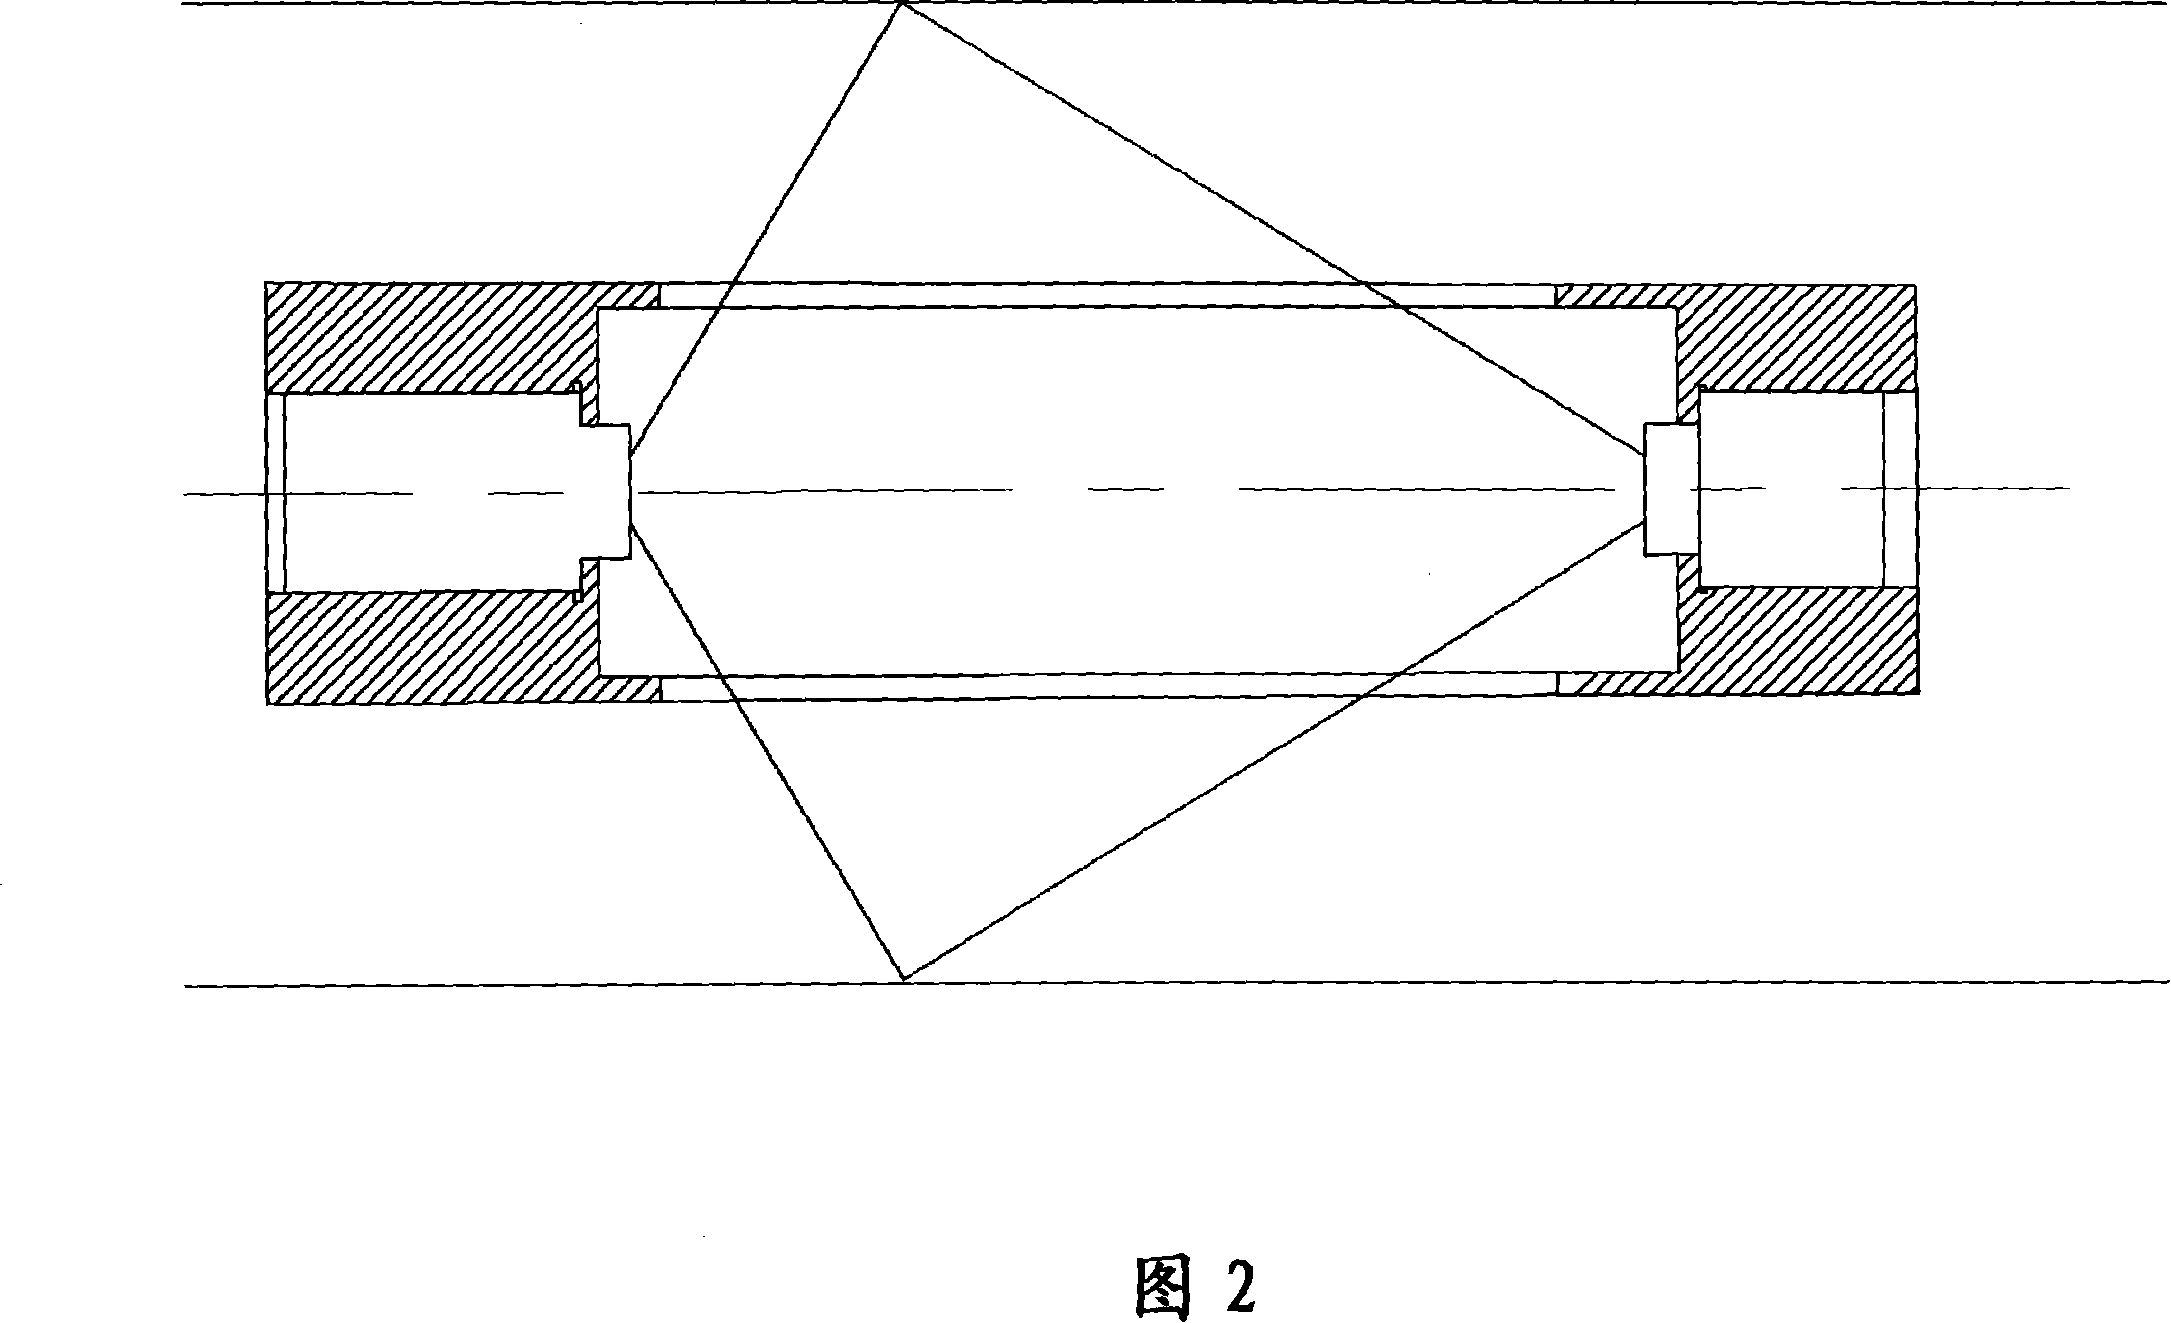 Optical measuring method for hole cubage